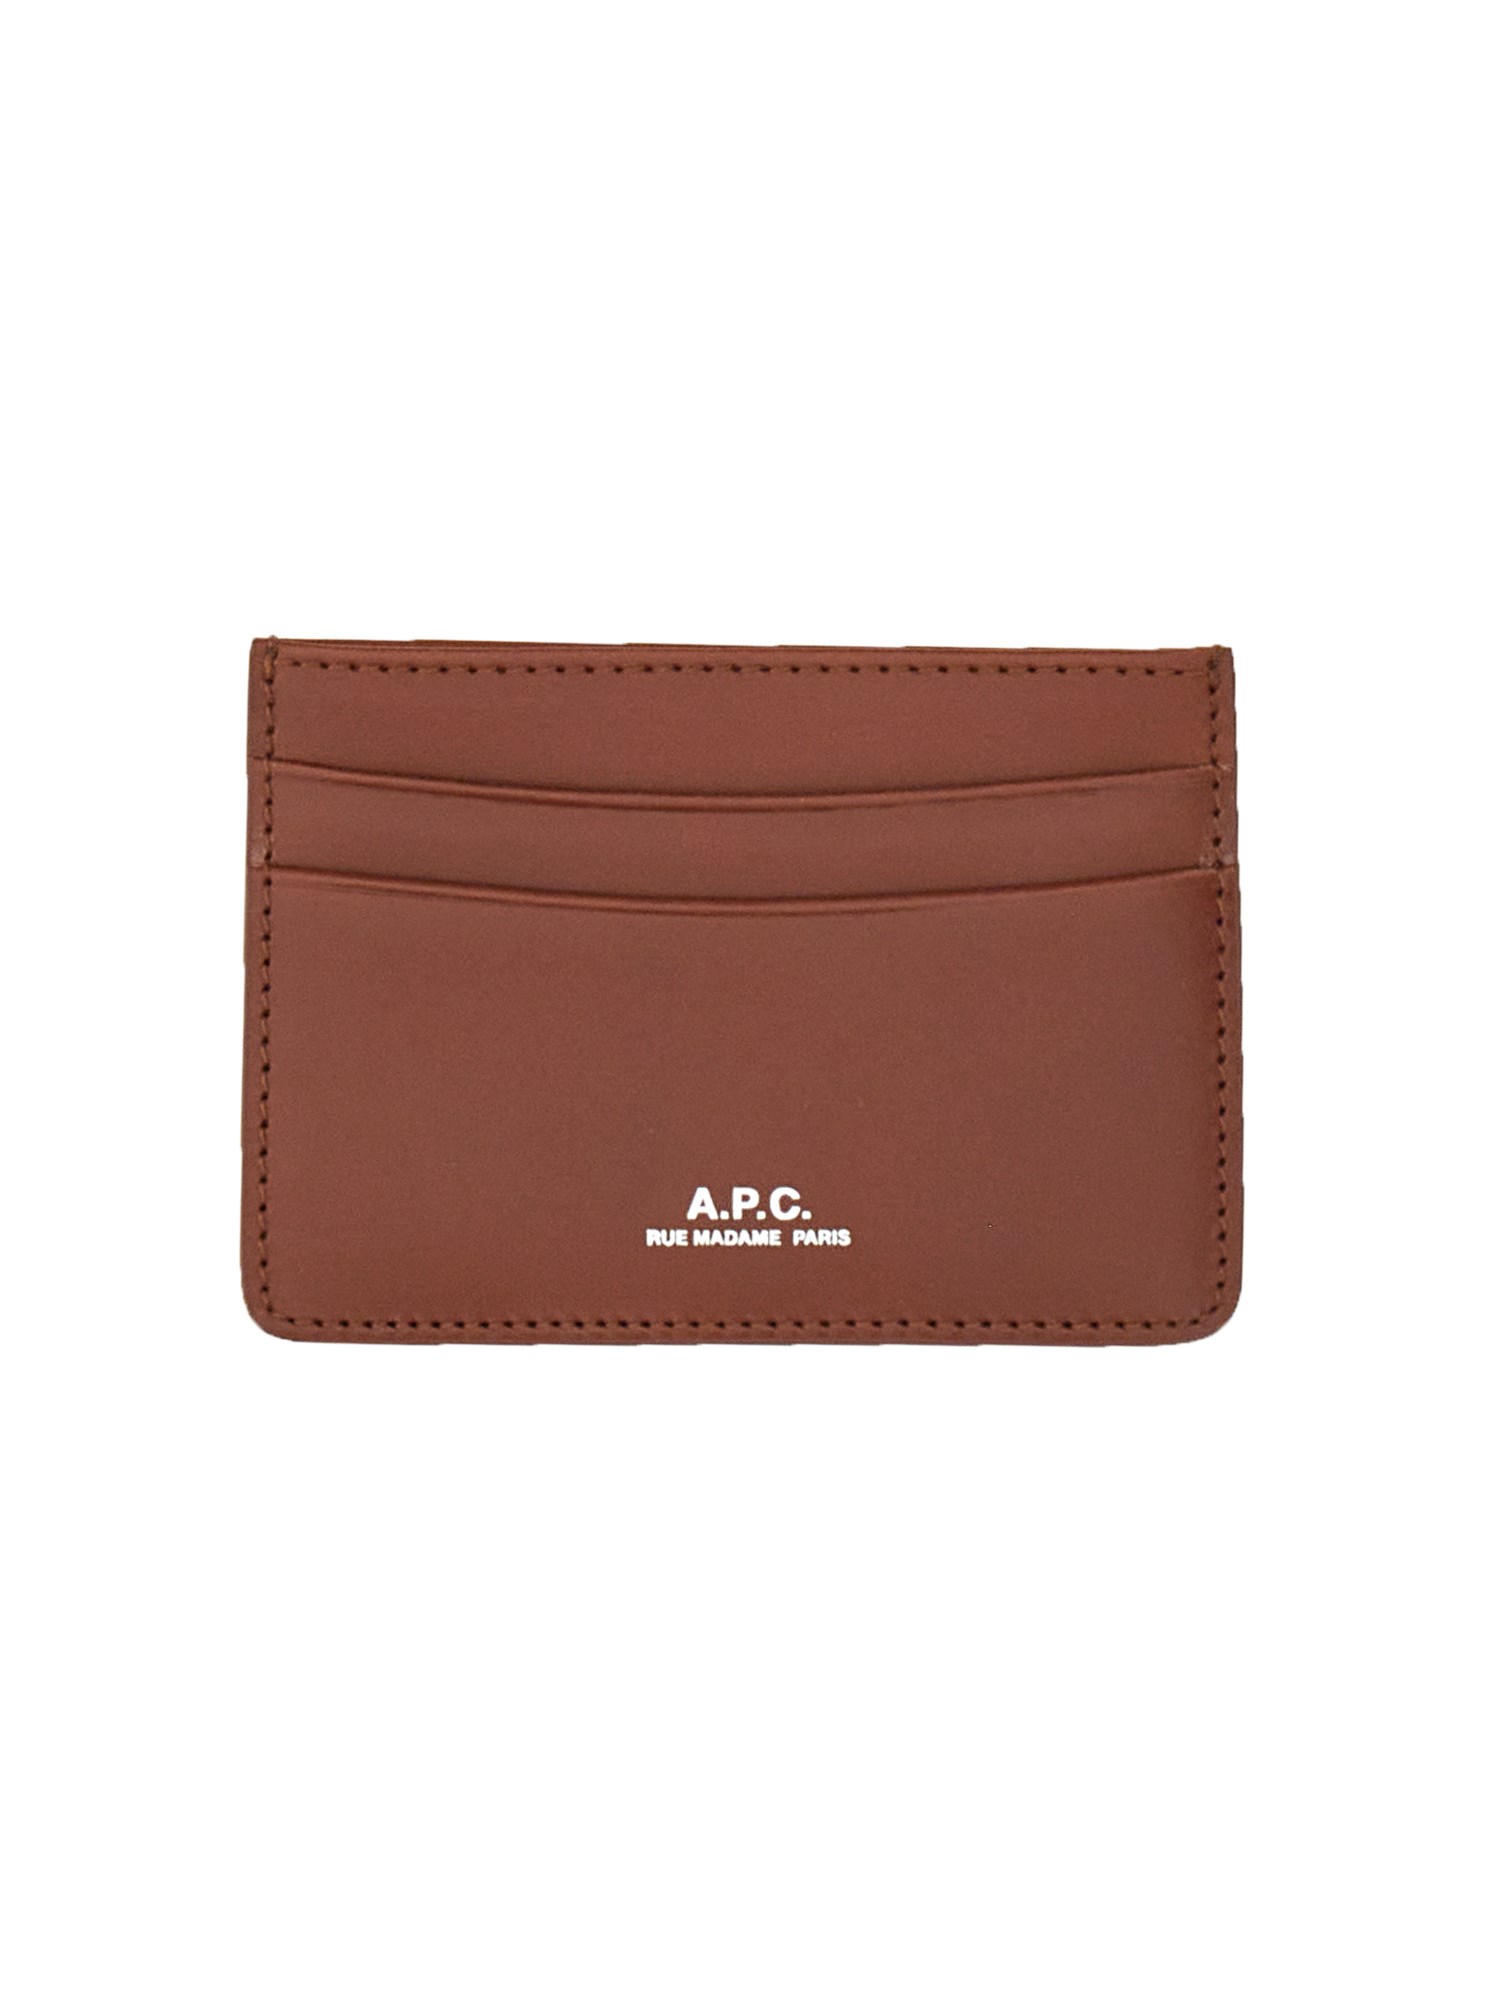 a.p.c. leather keychain